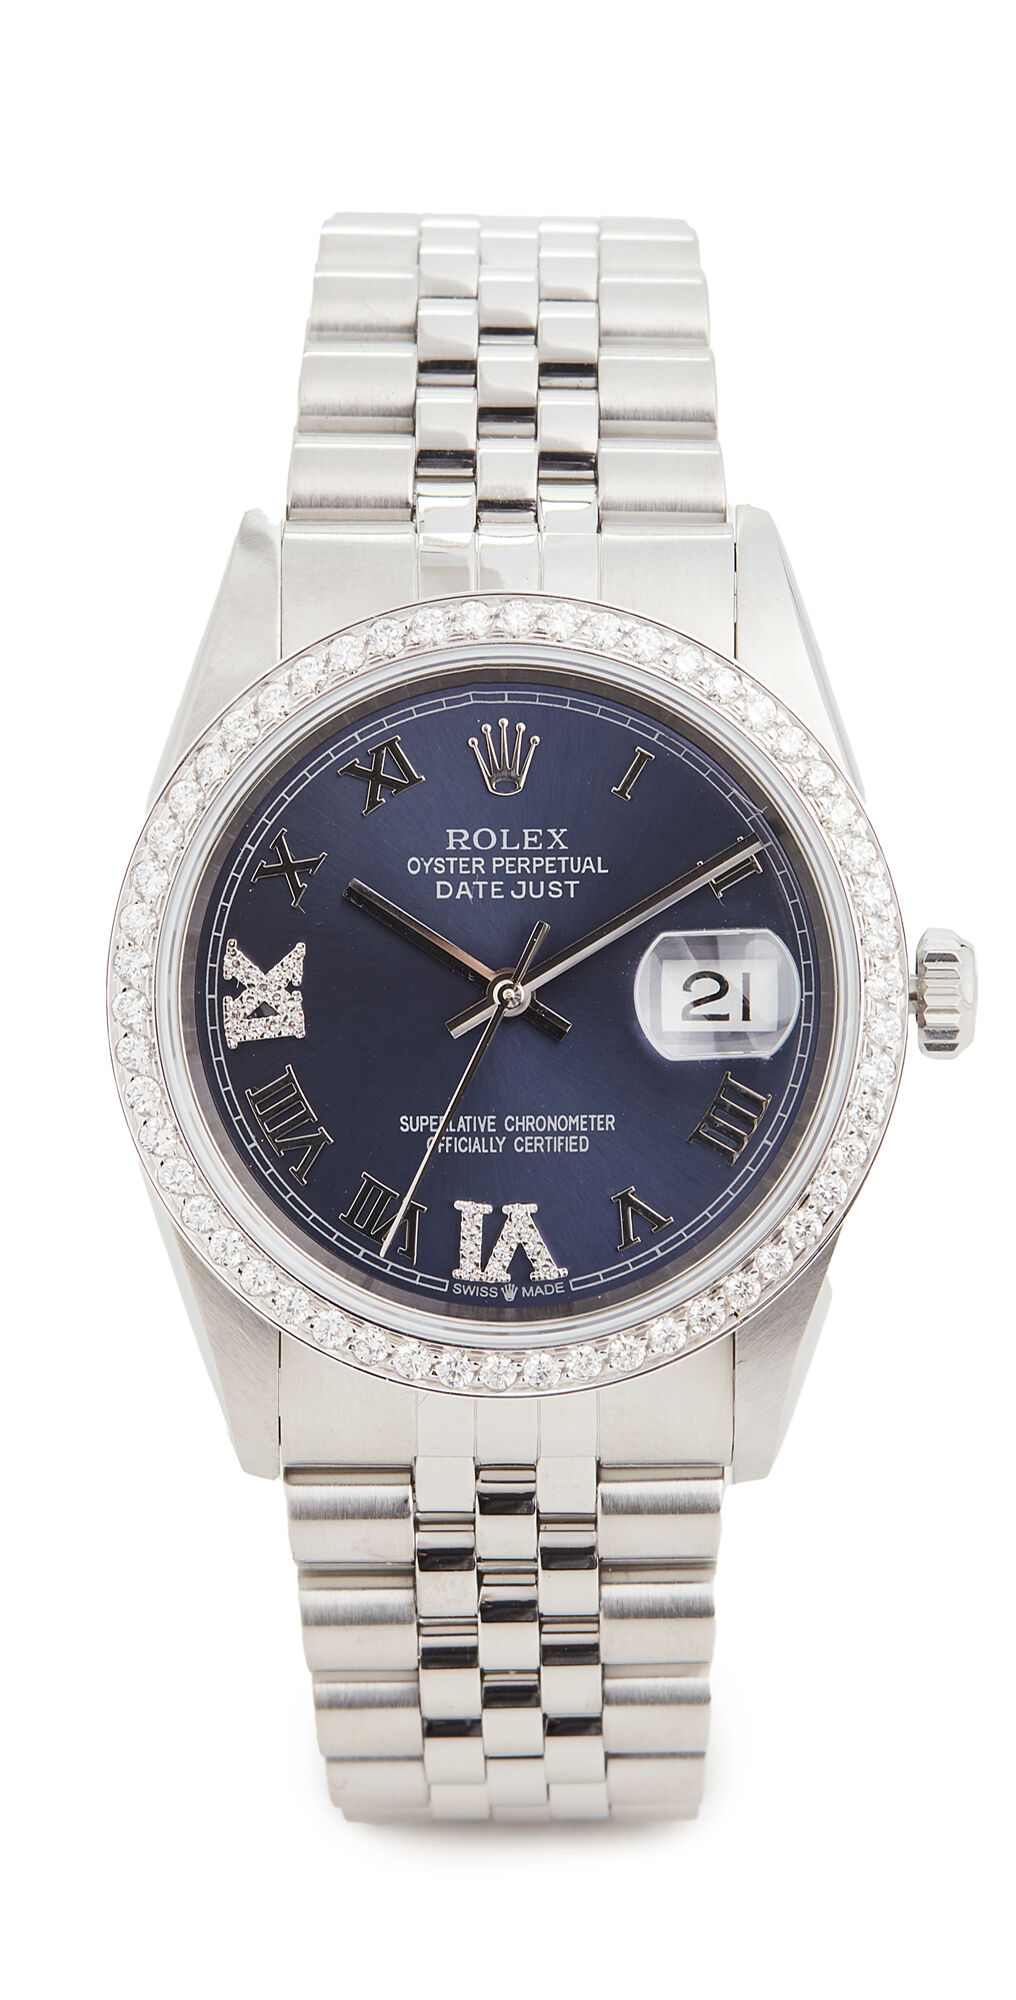 Pre-Owned Rolex 36mm Gents Rolex Date Just Purple Watch Silver/Purple One Size  Silver/Purple  size:One Size